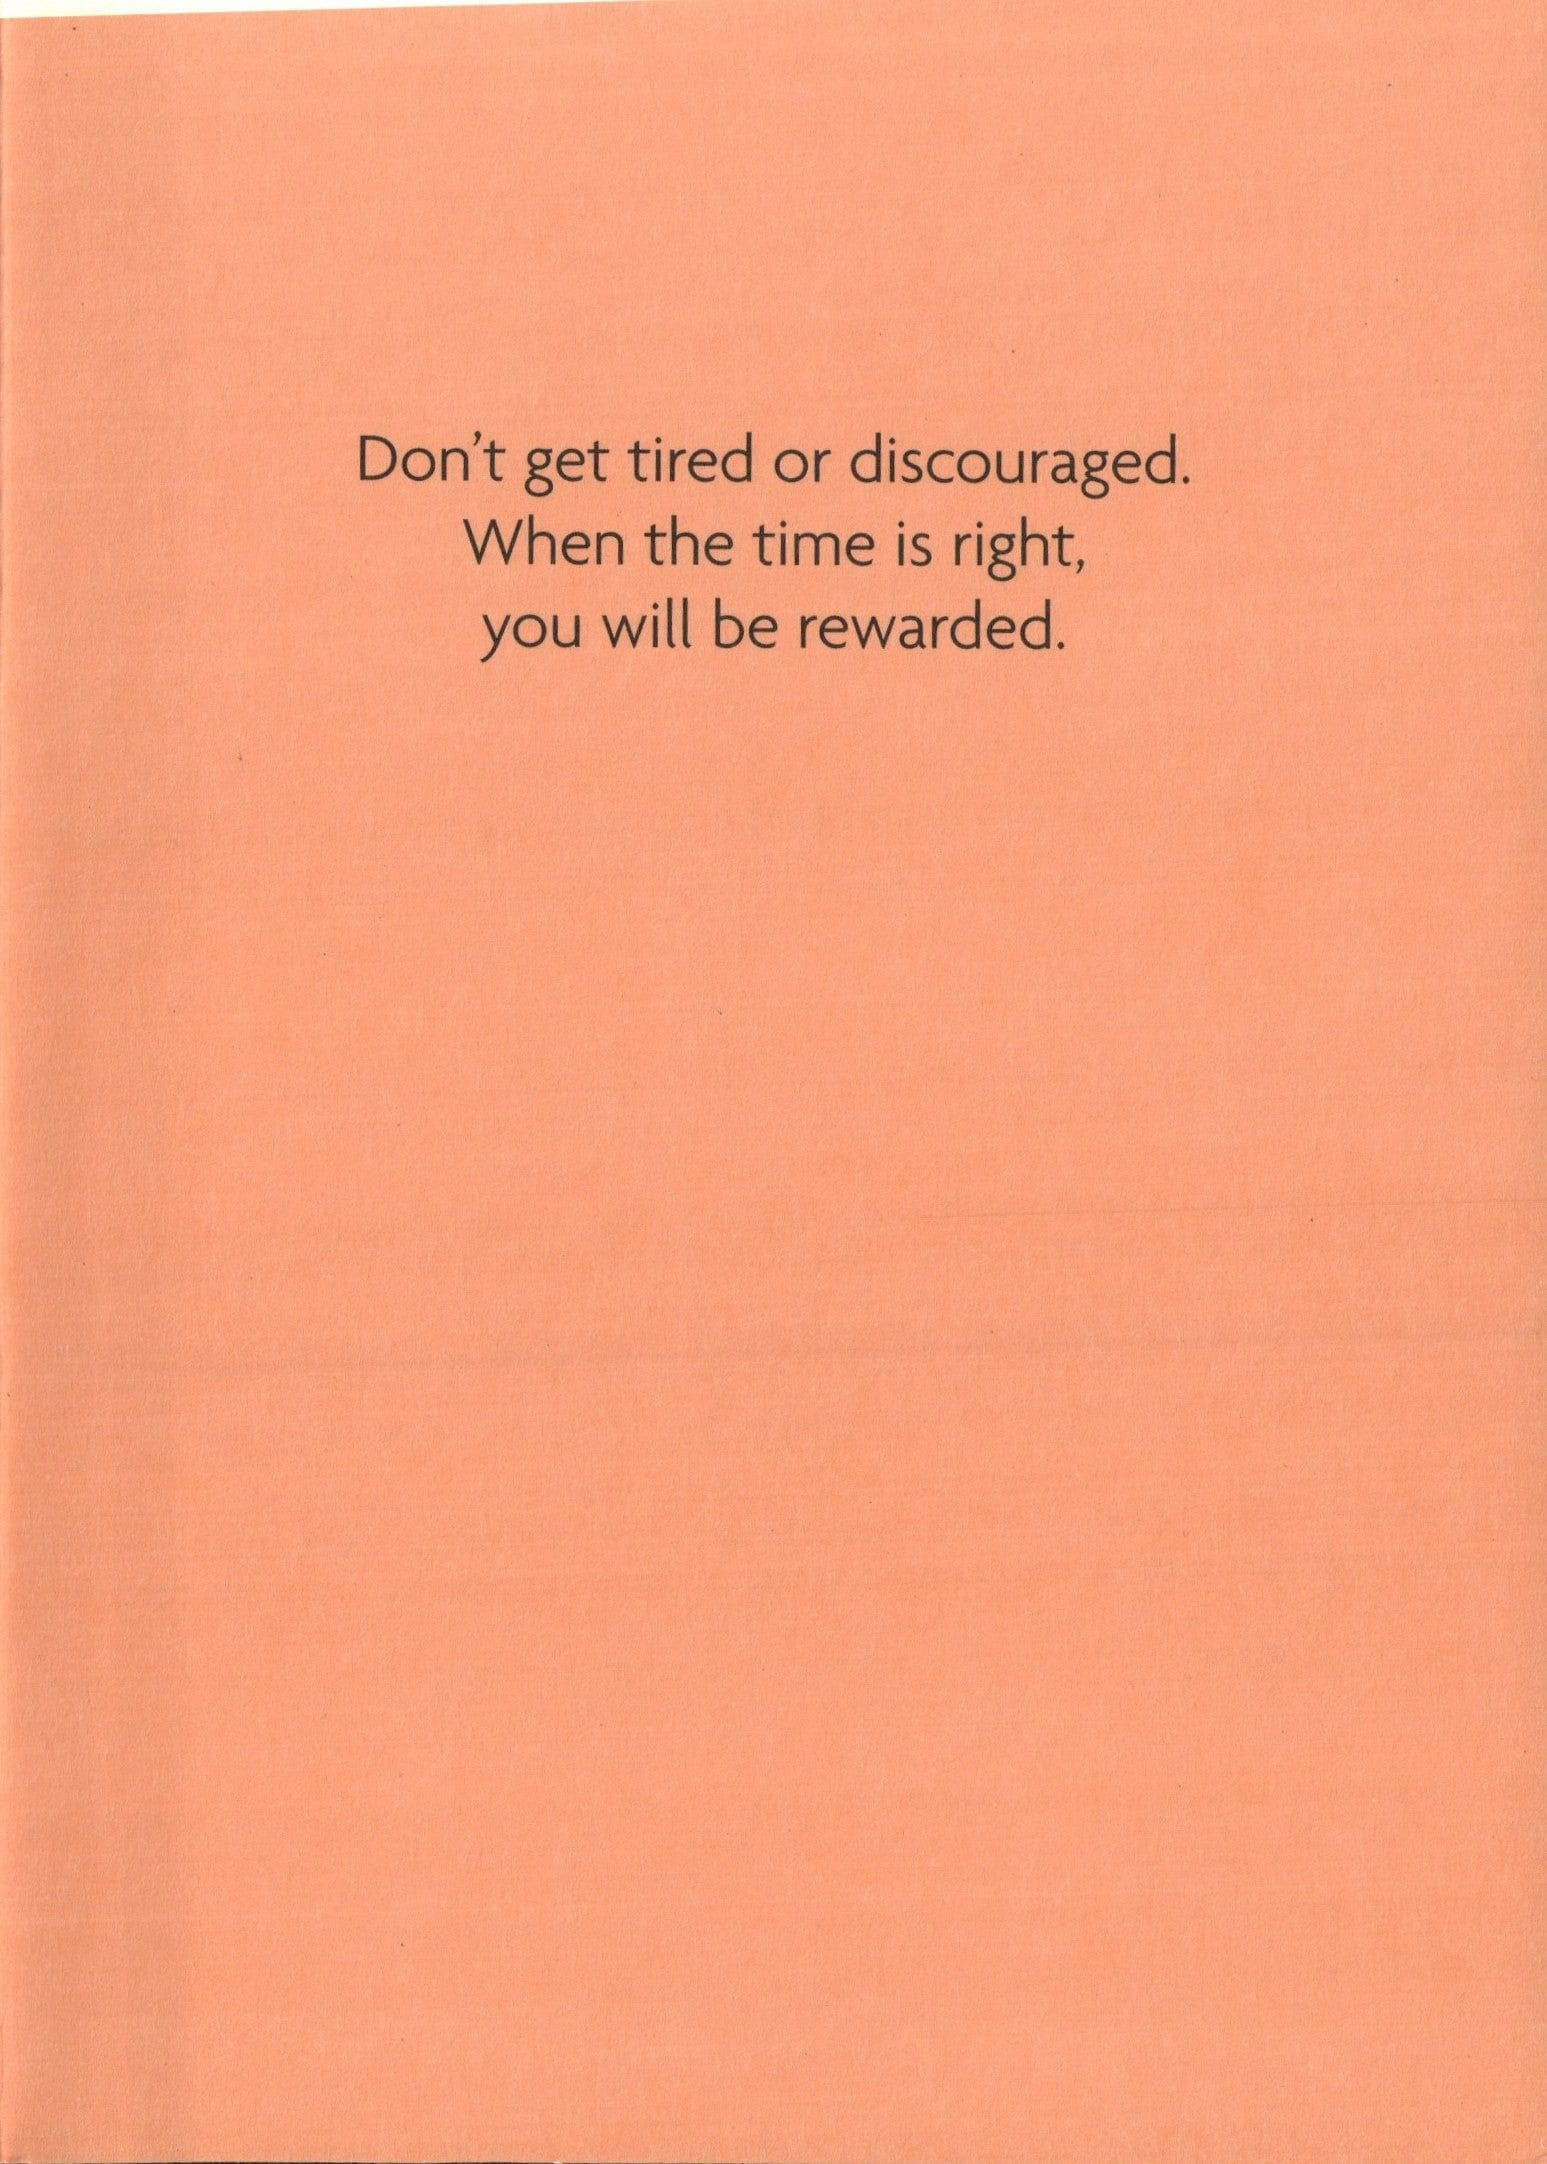 Encouragement Card - Keep Going Sign - Shelburne Country Store